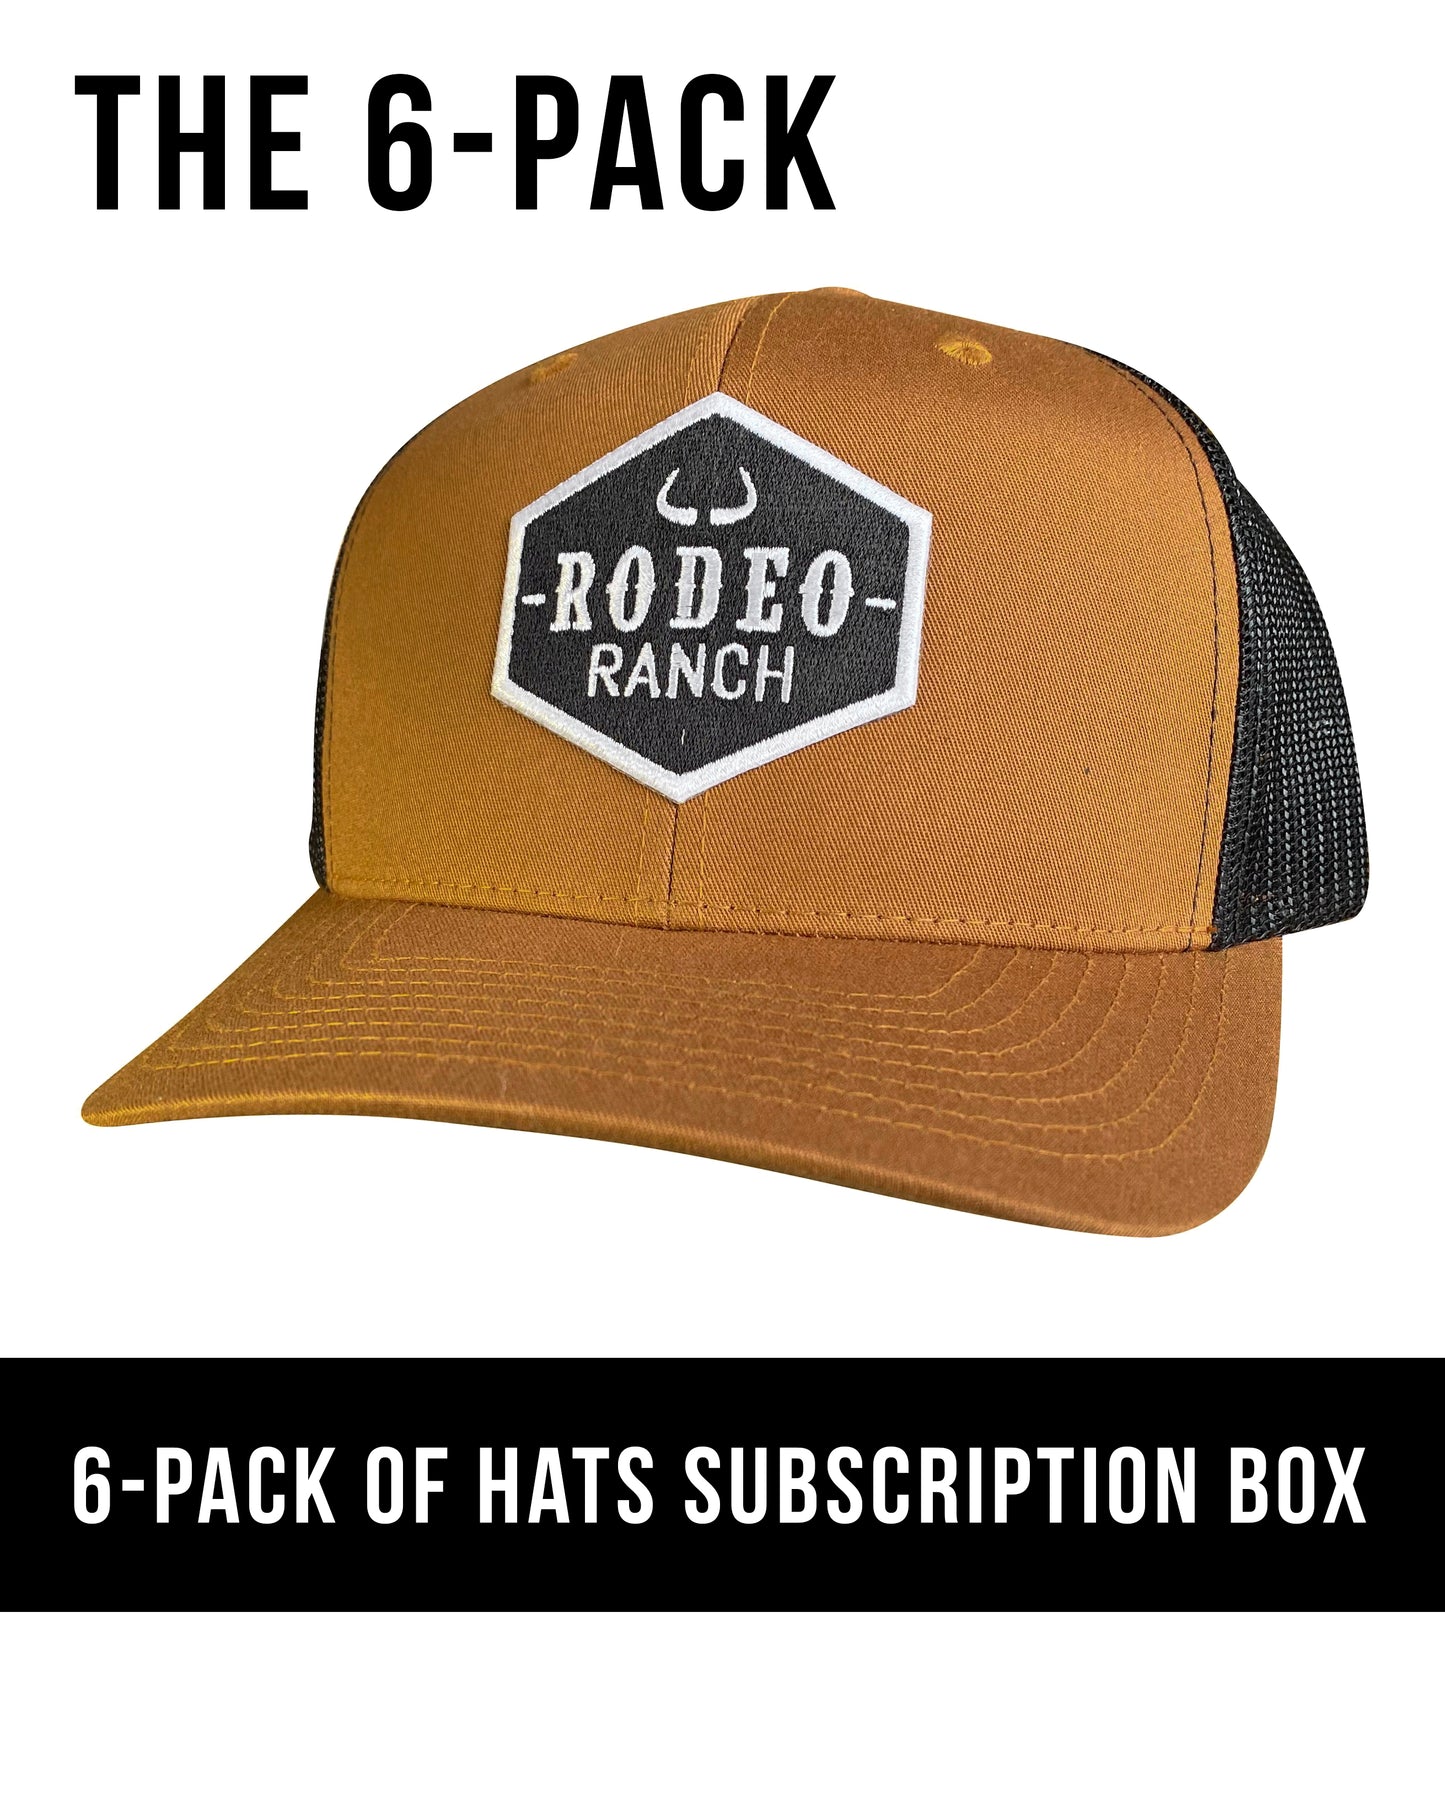 Rodeo Ranch 6 Pack of Caps Subscription Box